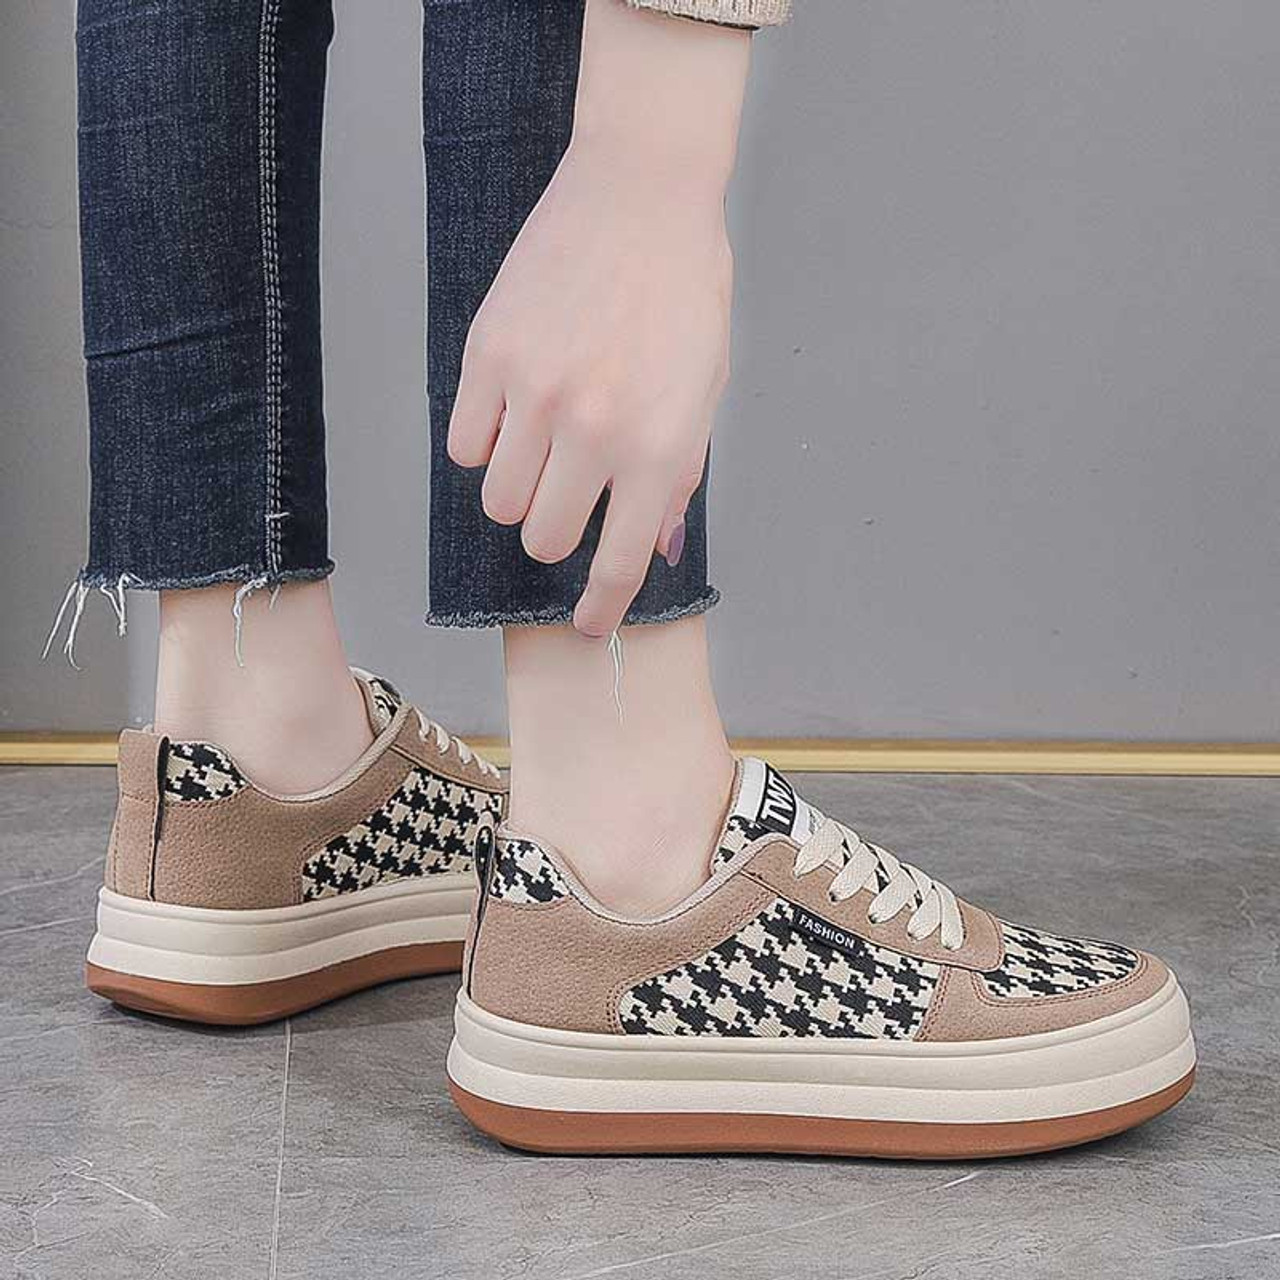 Brown chidori pattern lace up shoe sneaker | Womens sneakers shoes ...